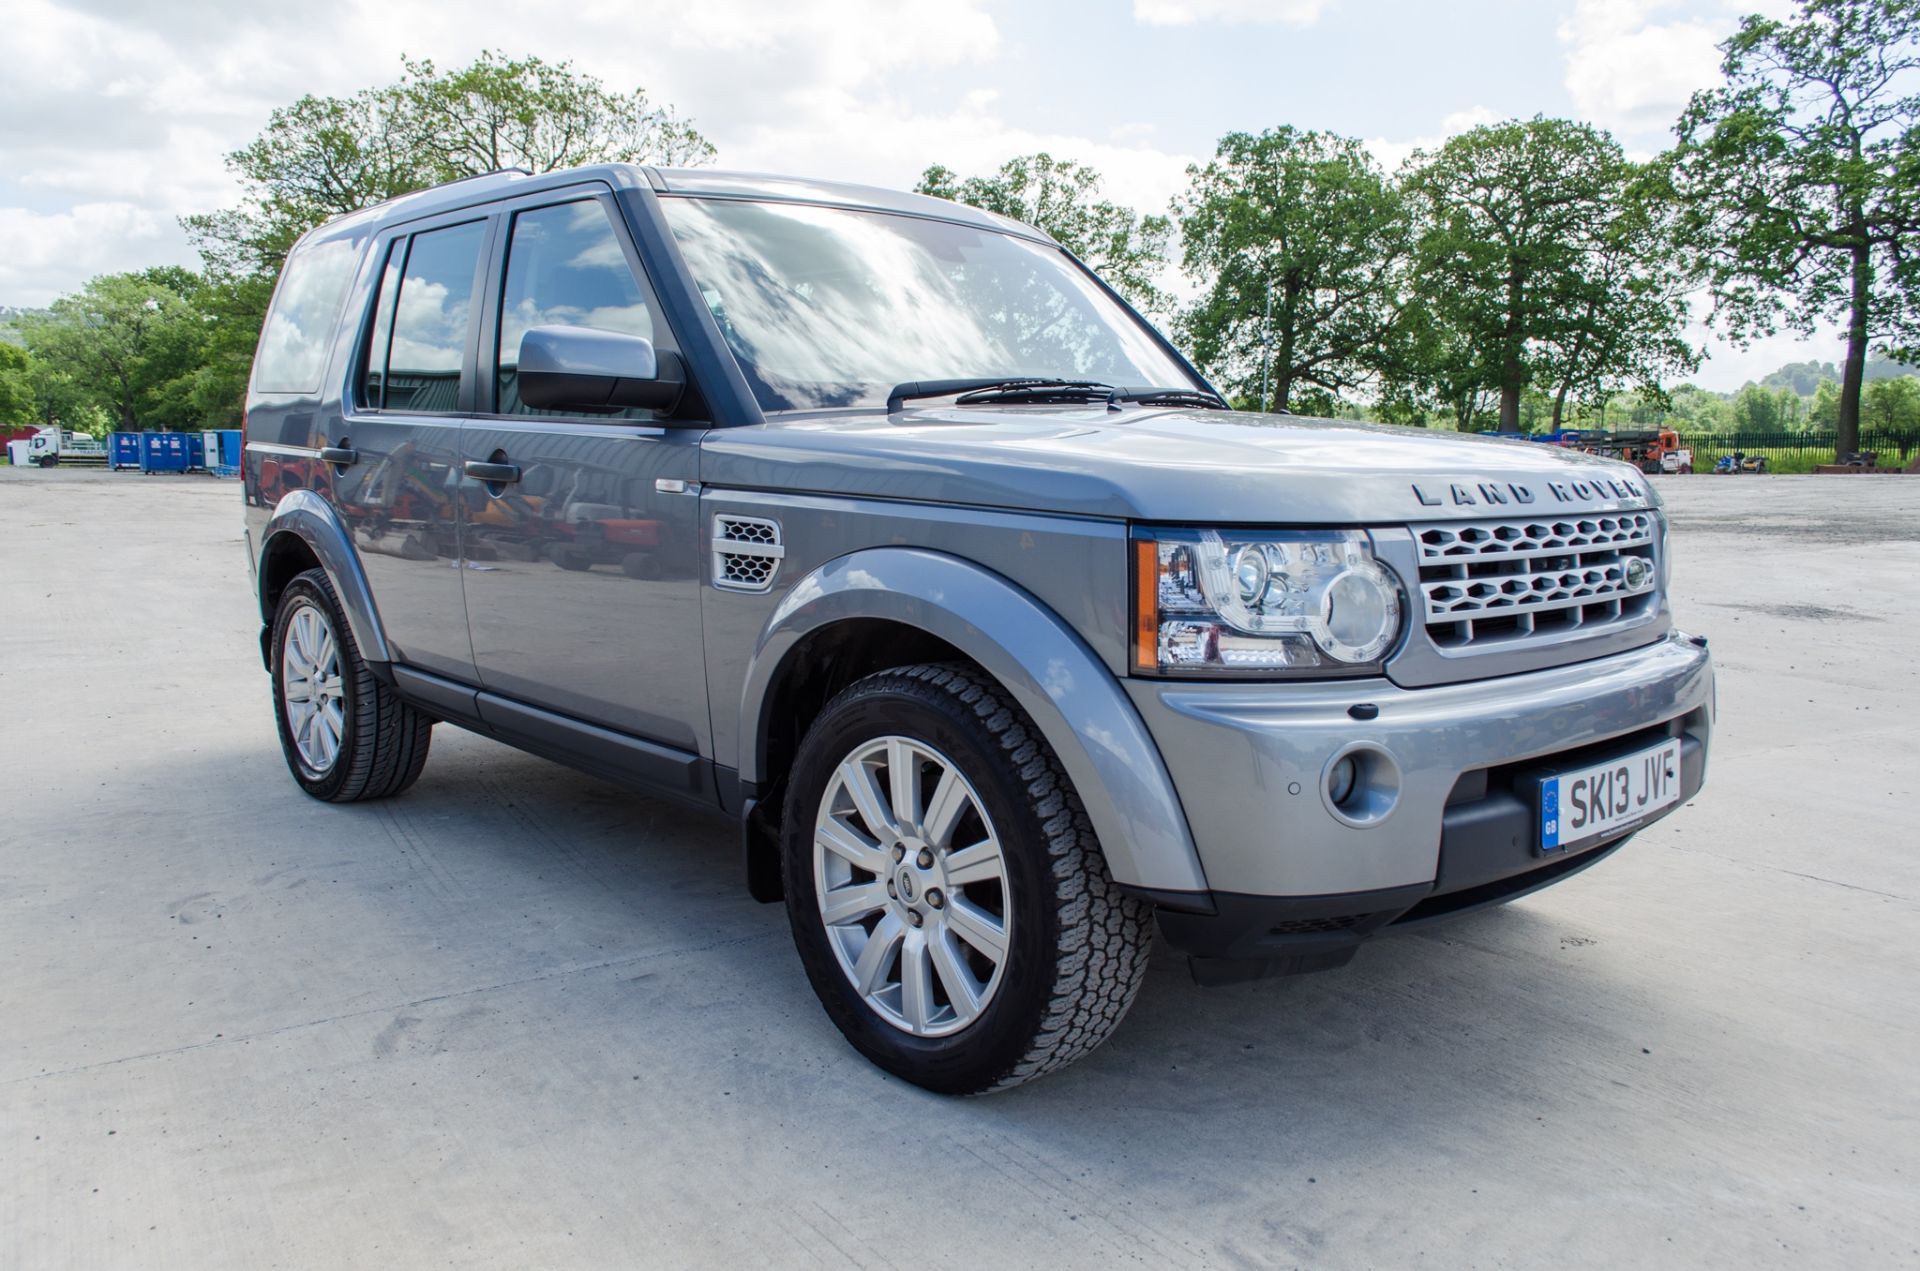 Land Rover Discovery 4 3.0 SDV6 255 XS 5 door SUV Registration Number: SK13 JVF Date of - Image 2 of 32